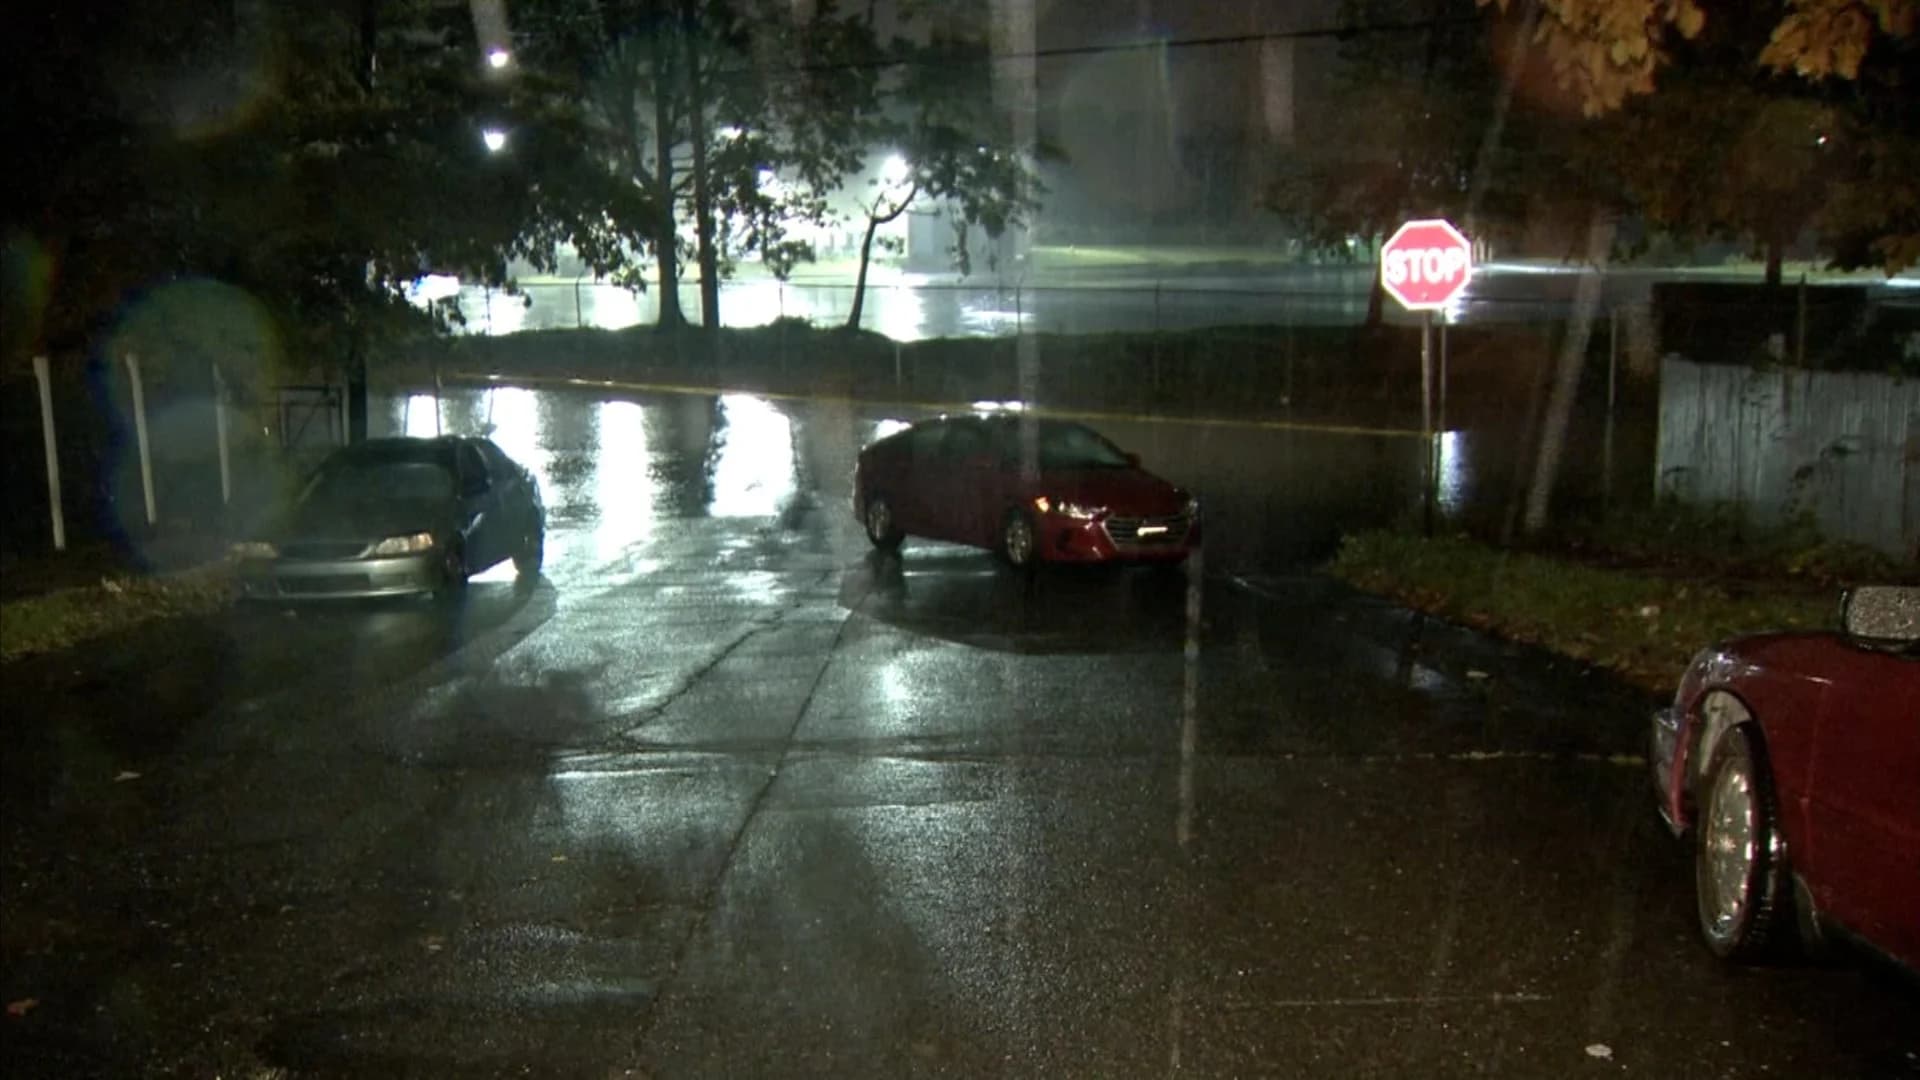 High winds, heavy rains cause some flooding in Bridgeport